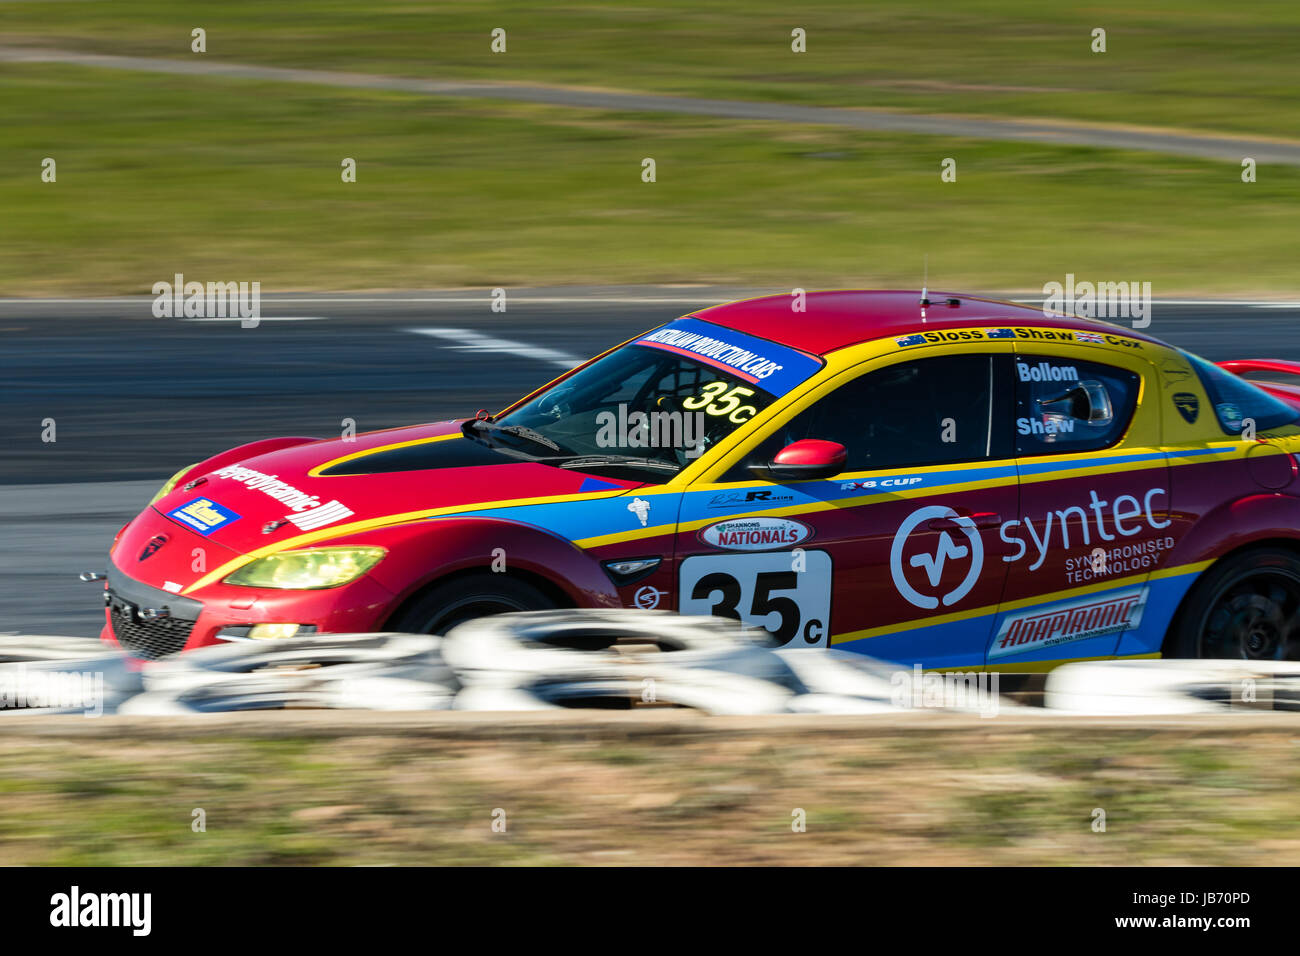 Melbourne, Australia. 10th June, 2017. Ric Shaw NSW 35 driving for Ric Shaw Racing / Syntec International  during the 2017 Shannon's Nationals, Round 3 - Winton, Australia on June 10 2017. Credit: Dave Hewison Sports/Alamy Live News Stock Photo